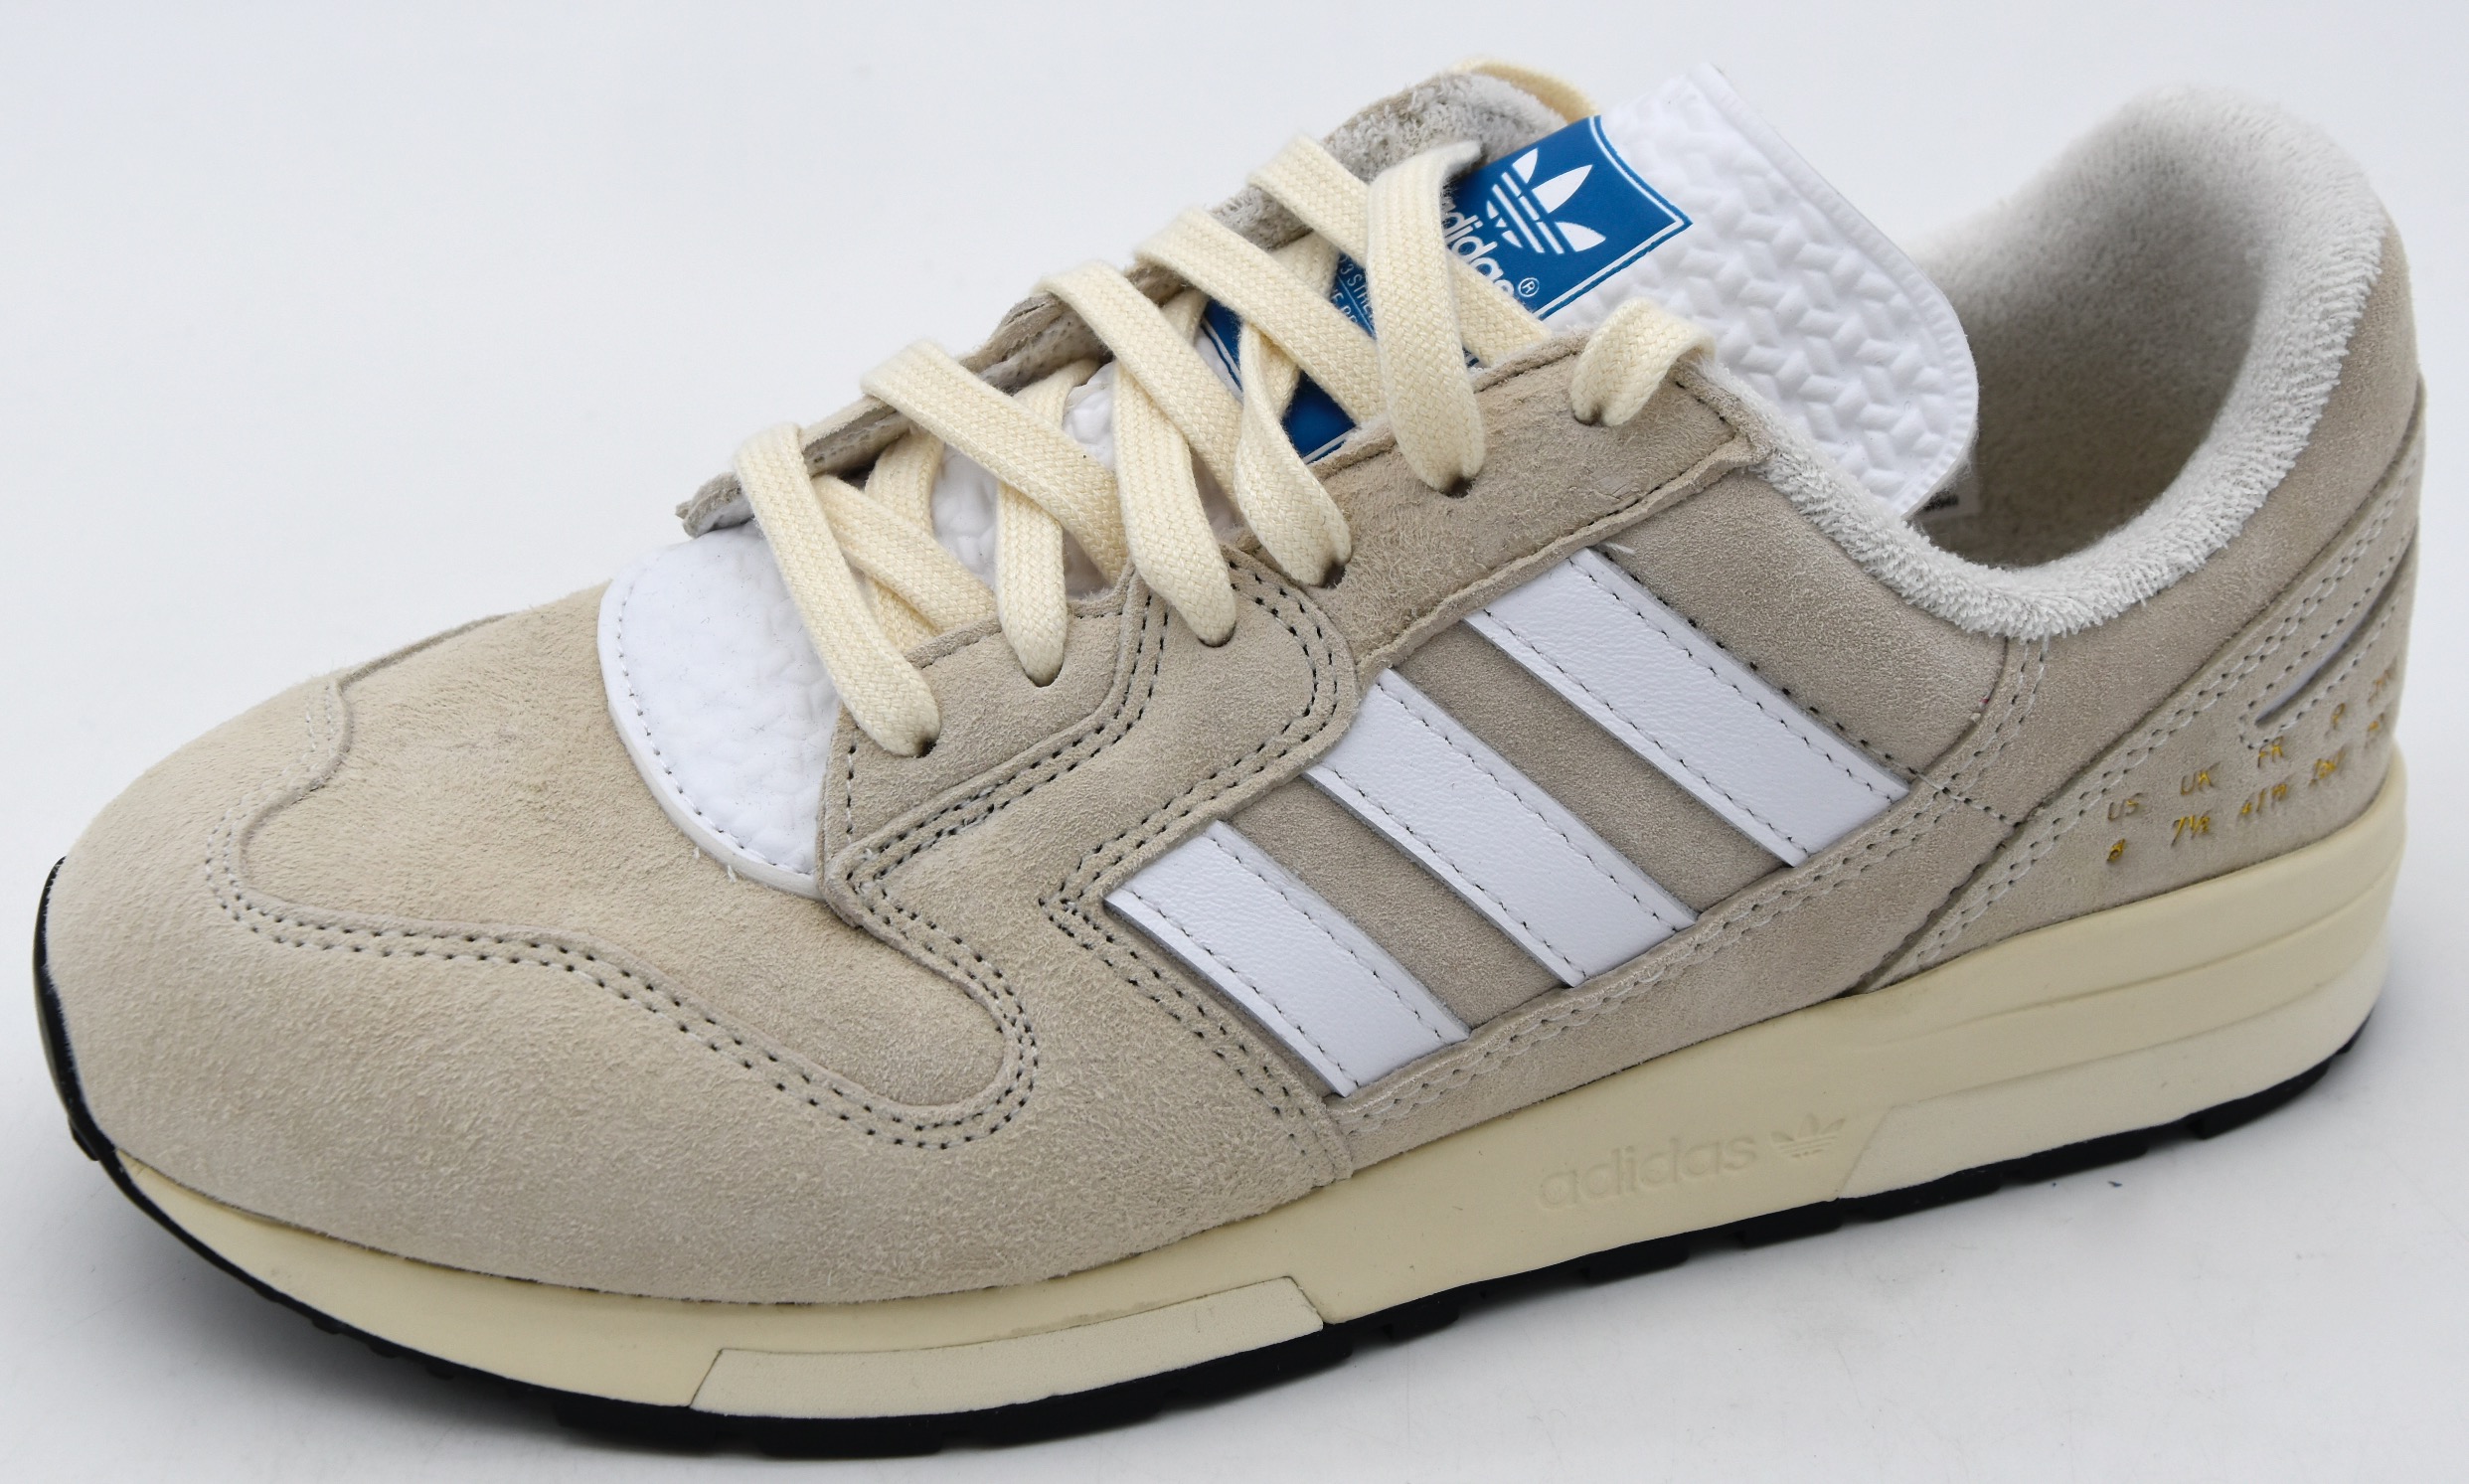 ADIDAS MAN SNEAKER SHOES SPORTS CASUAL TRAINERS SUEDE CODE H05657 ZX 420